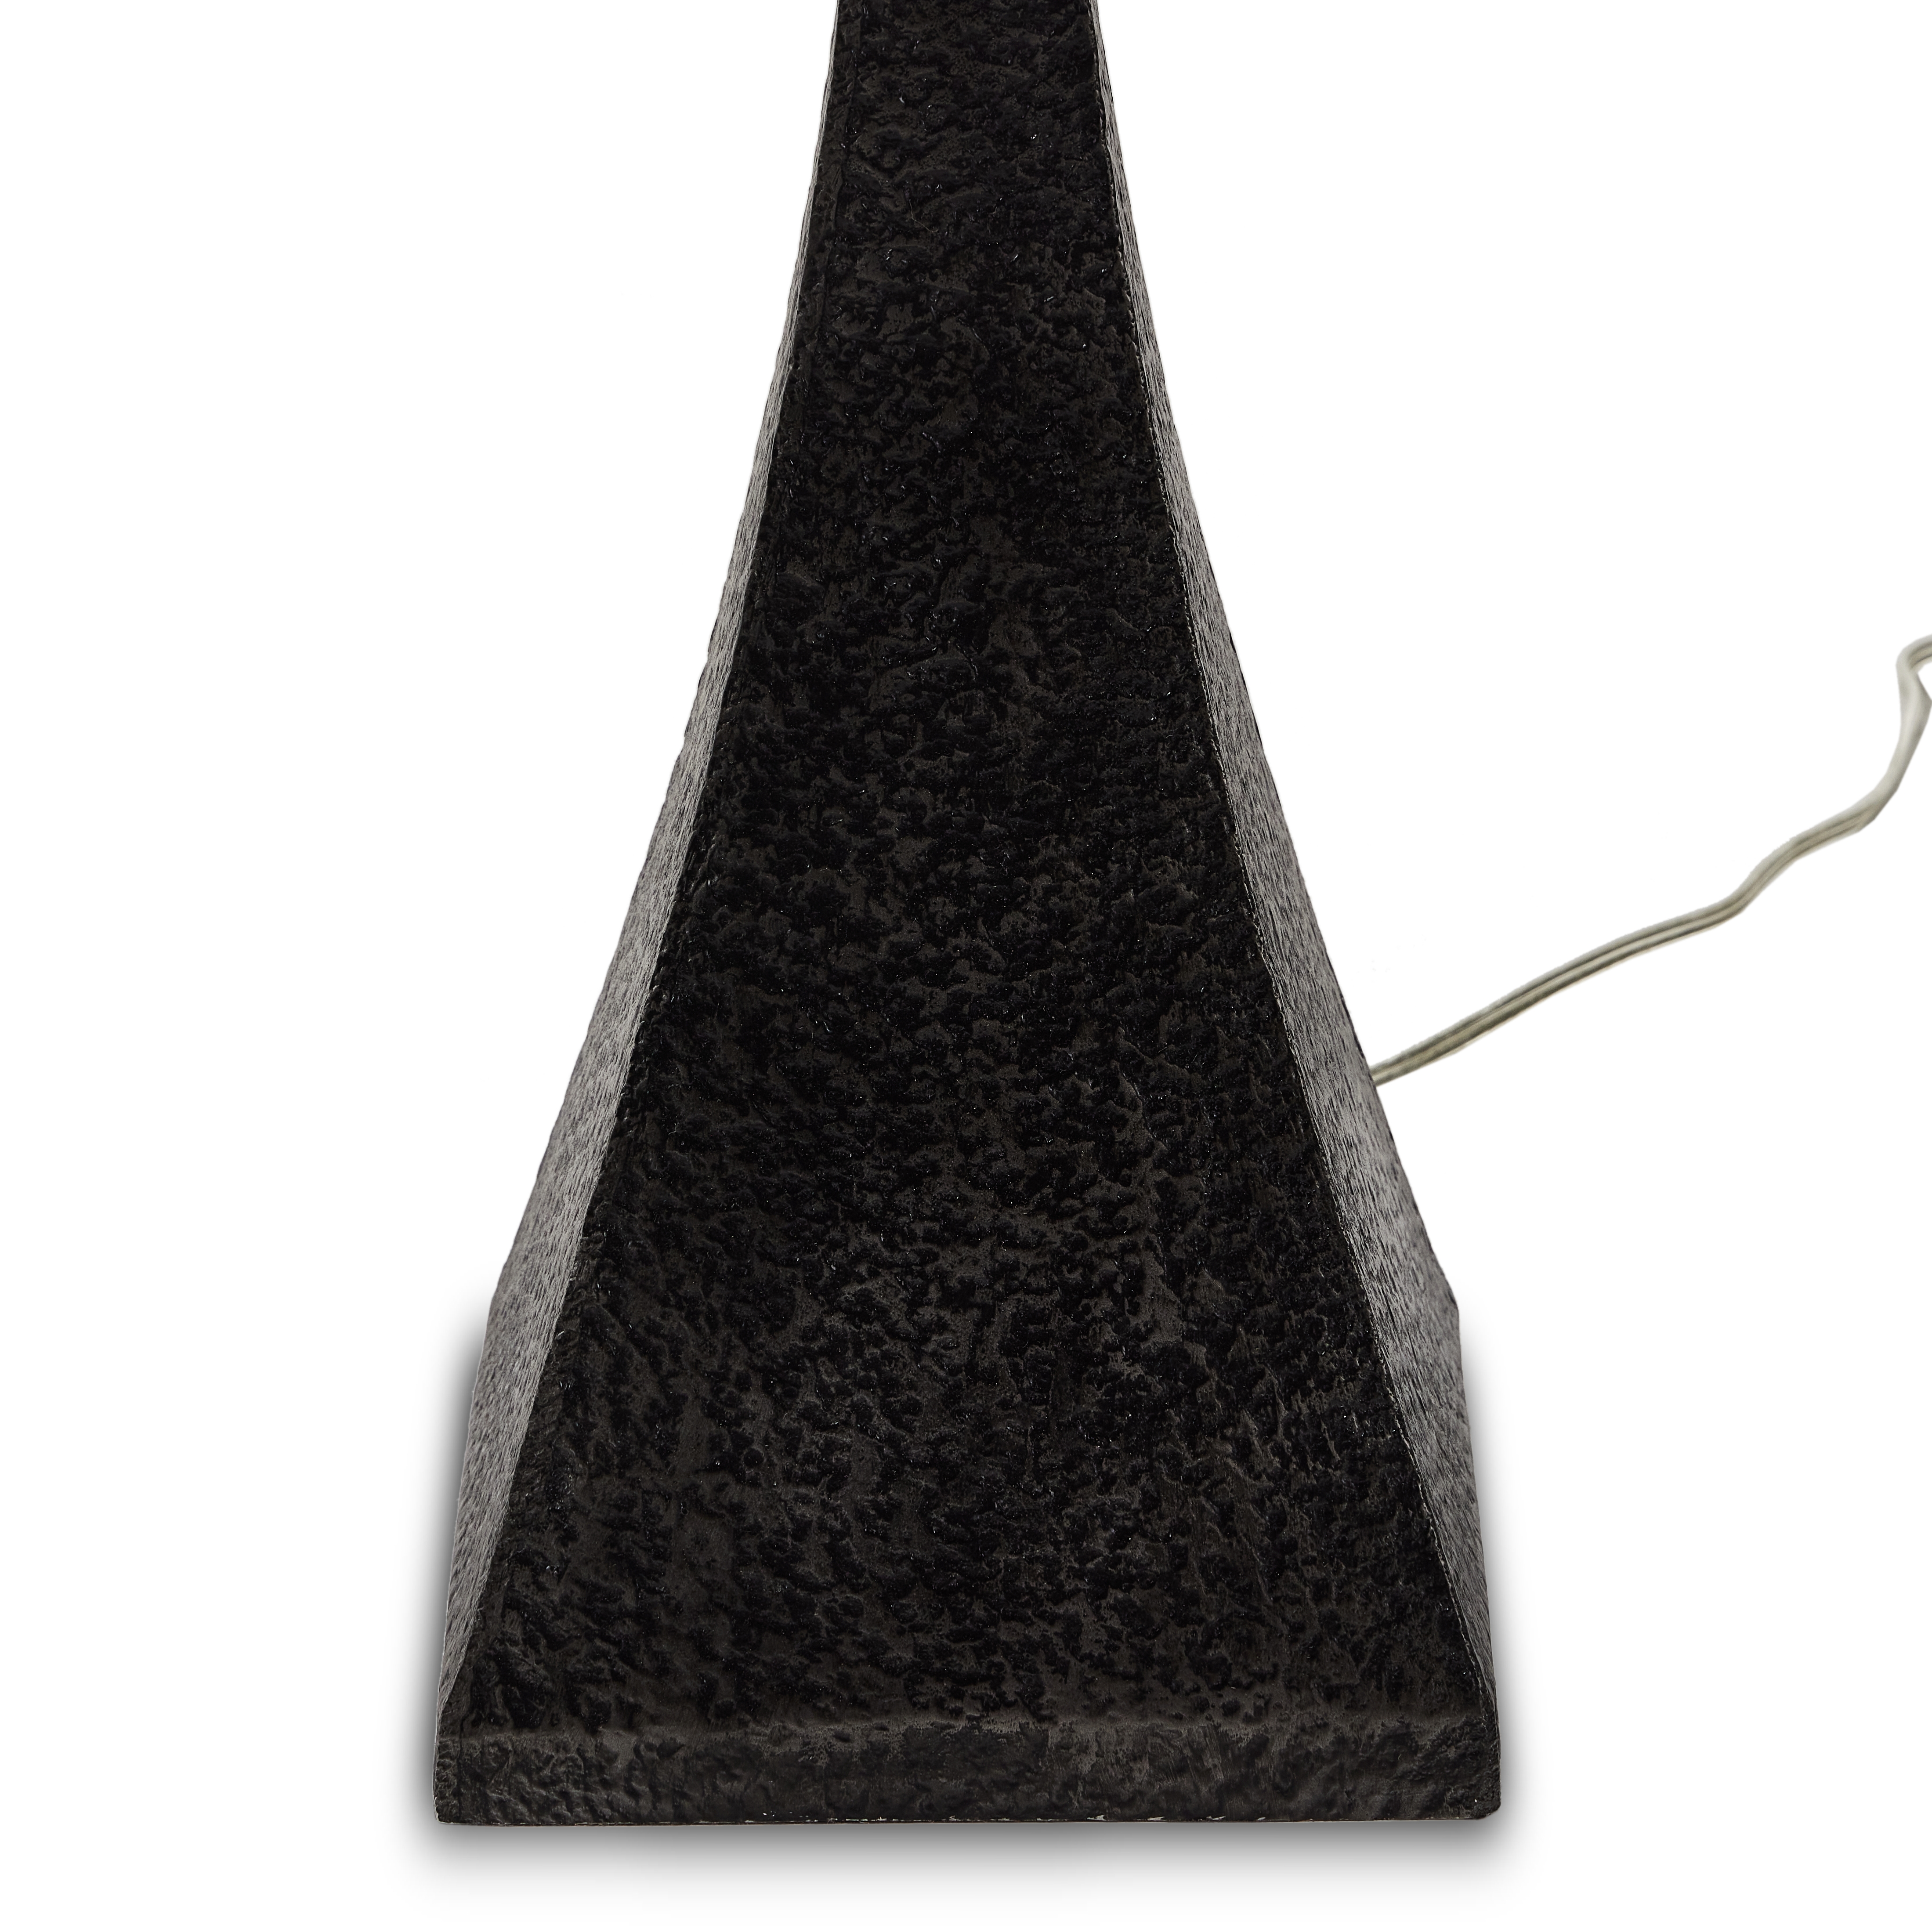 Tapered Forged Floor Lamp-Forged Blk - Image 7